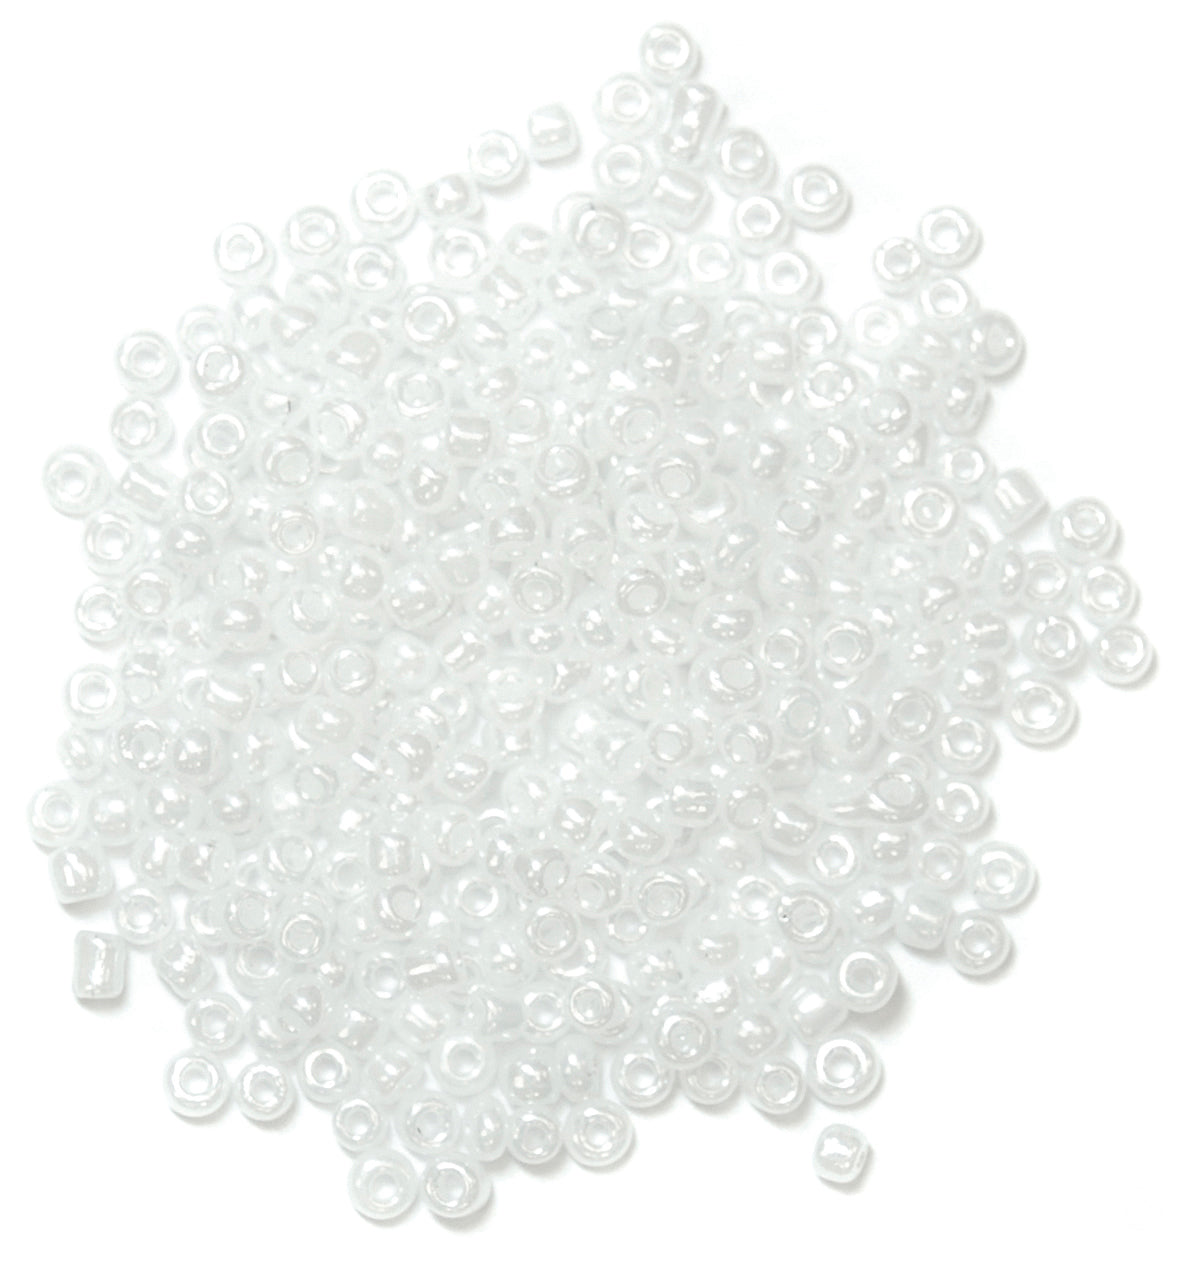 Trimits Seed Beads - 8g